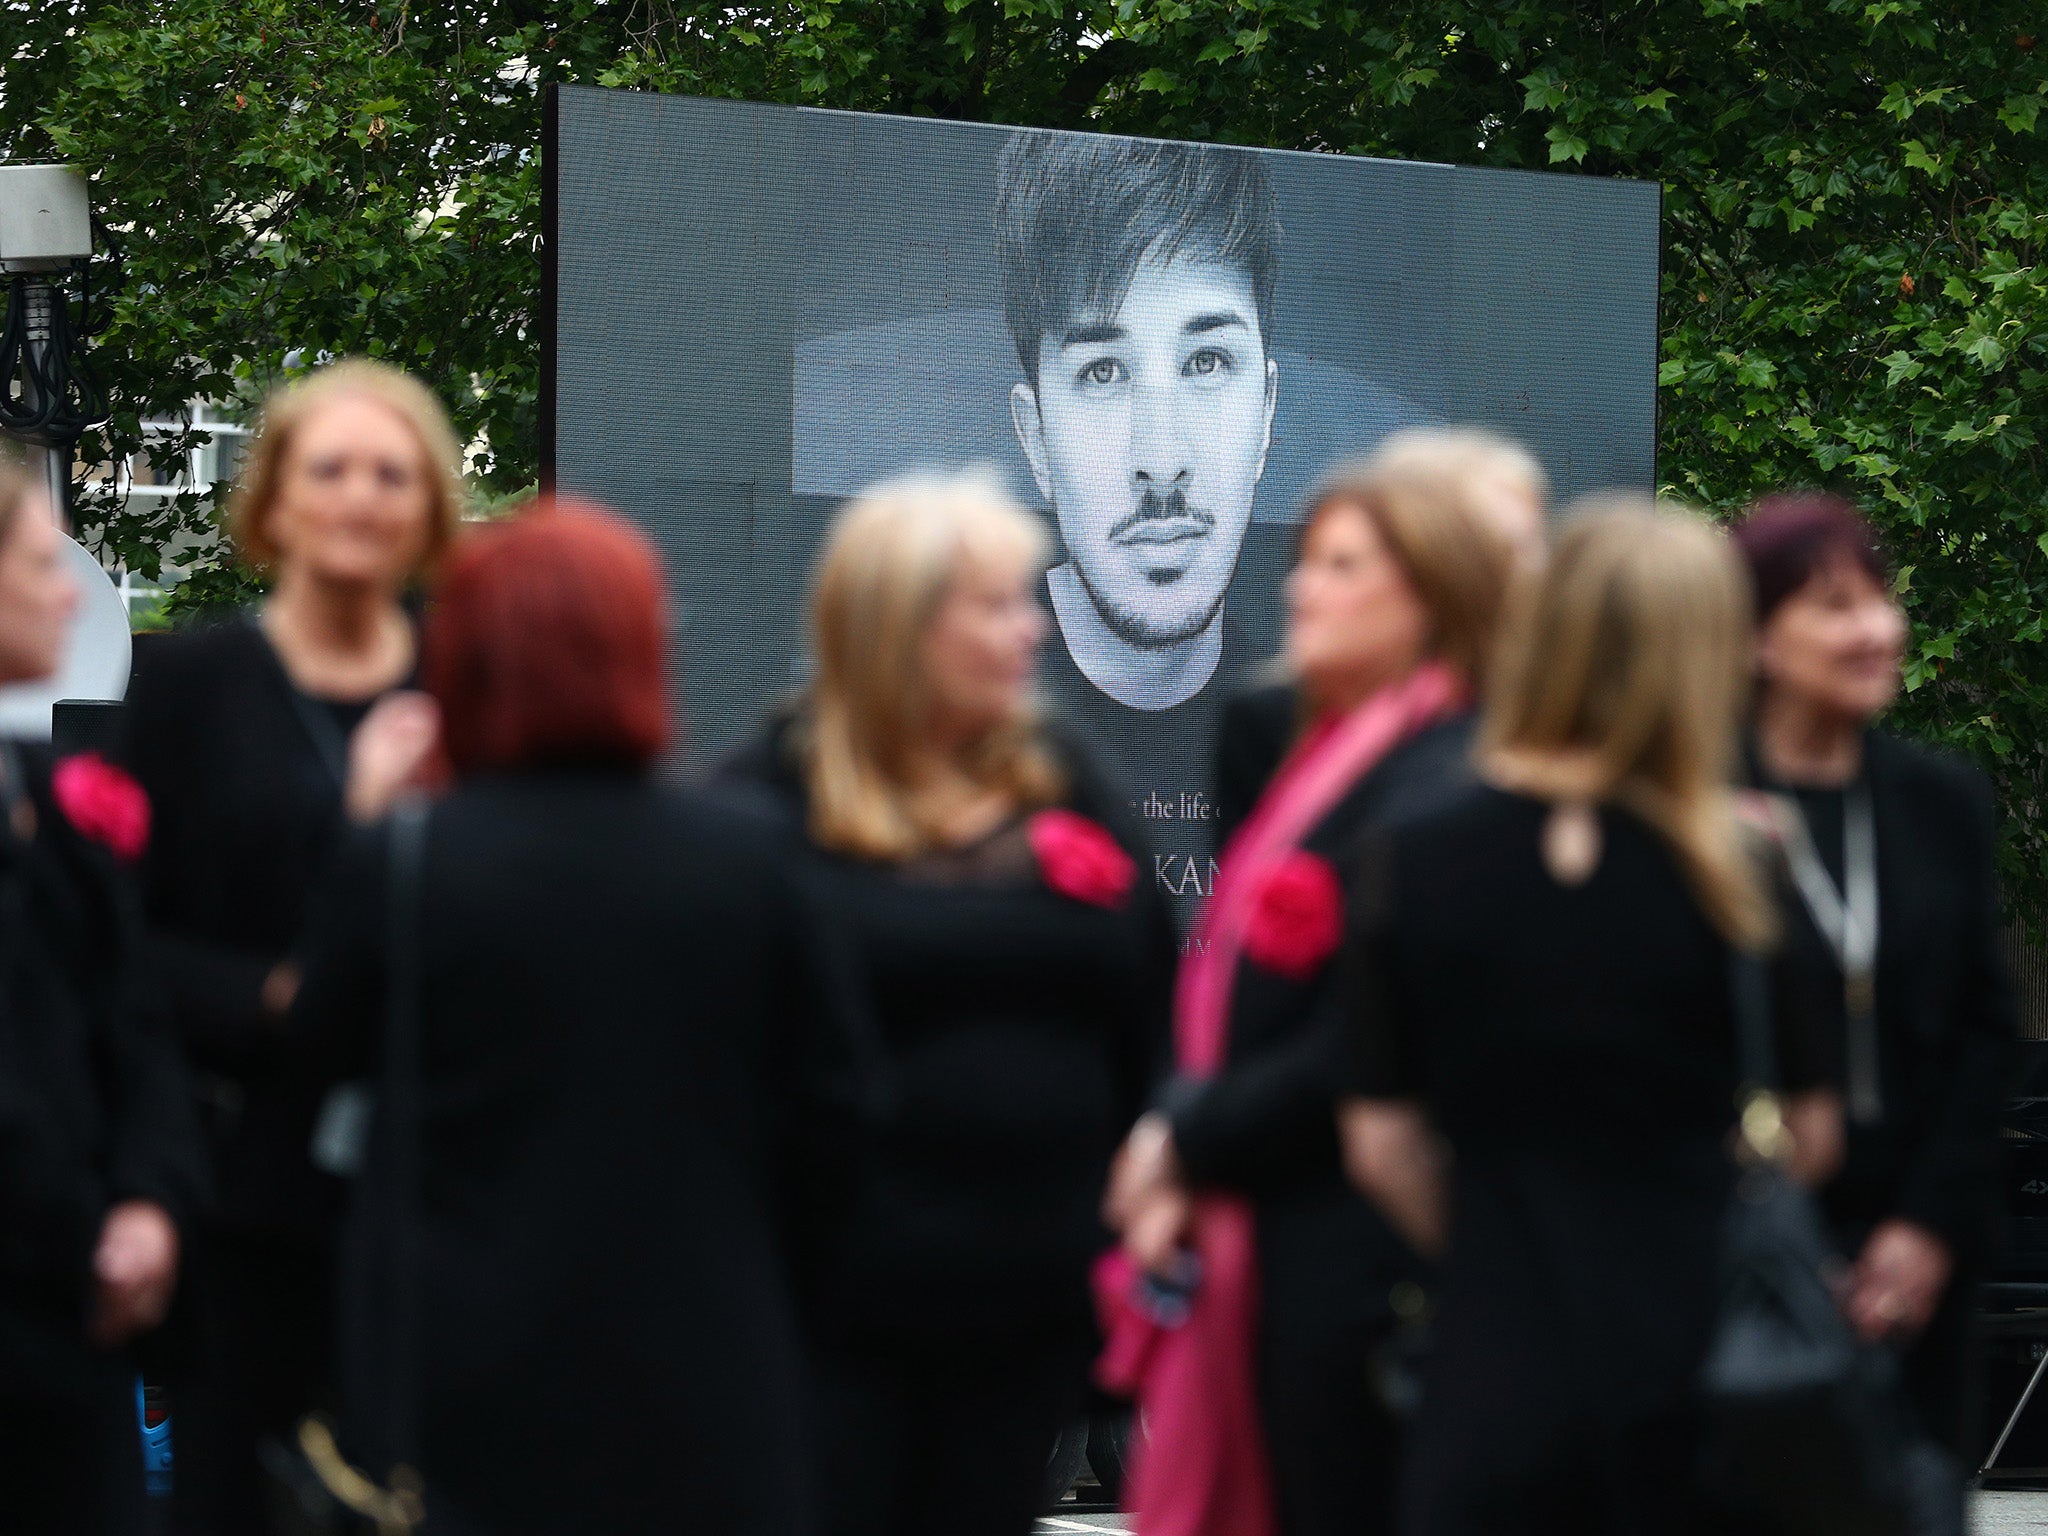 A screen displaying an image of Martyn Hett as mourners arrive for his funeral in Stockport, 2017